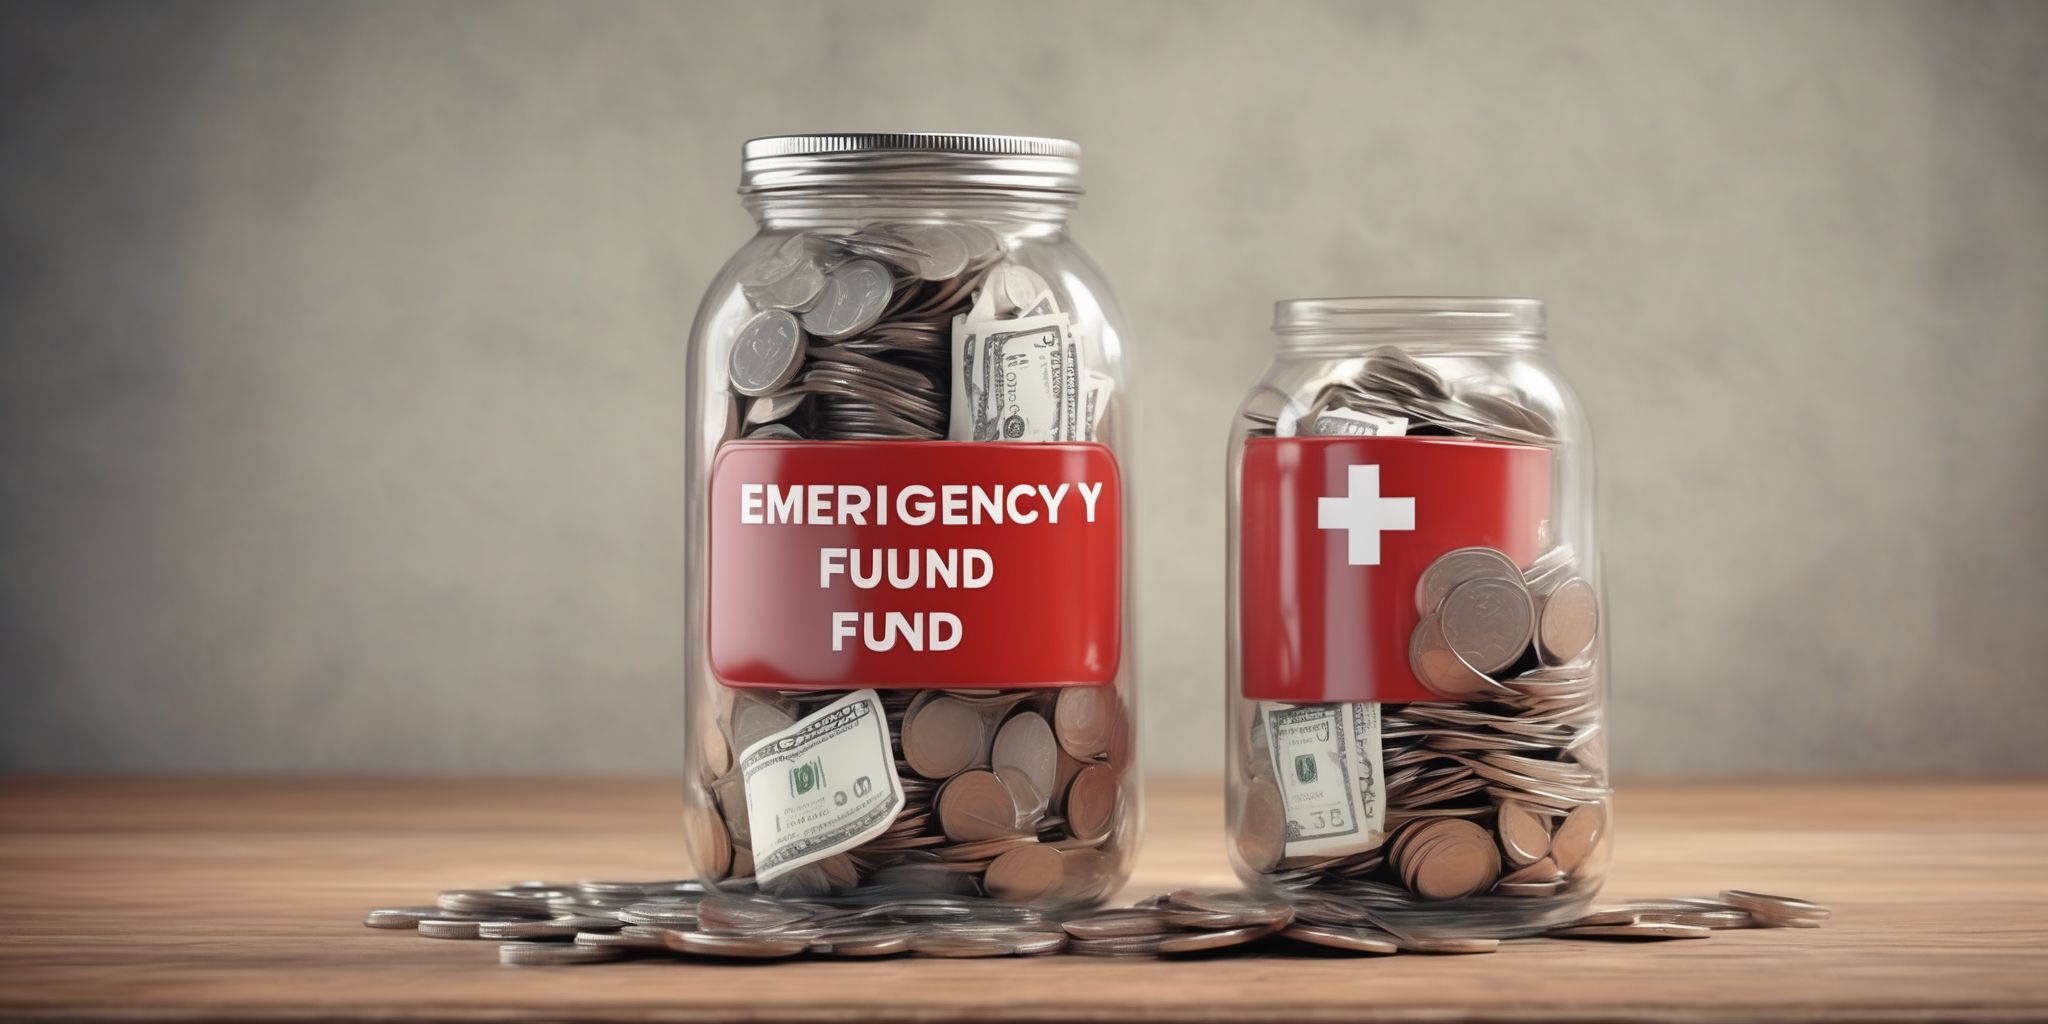 Emergency fund  in realistic, photographic style